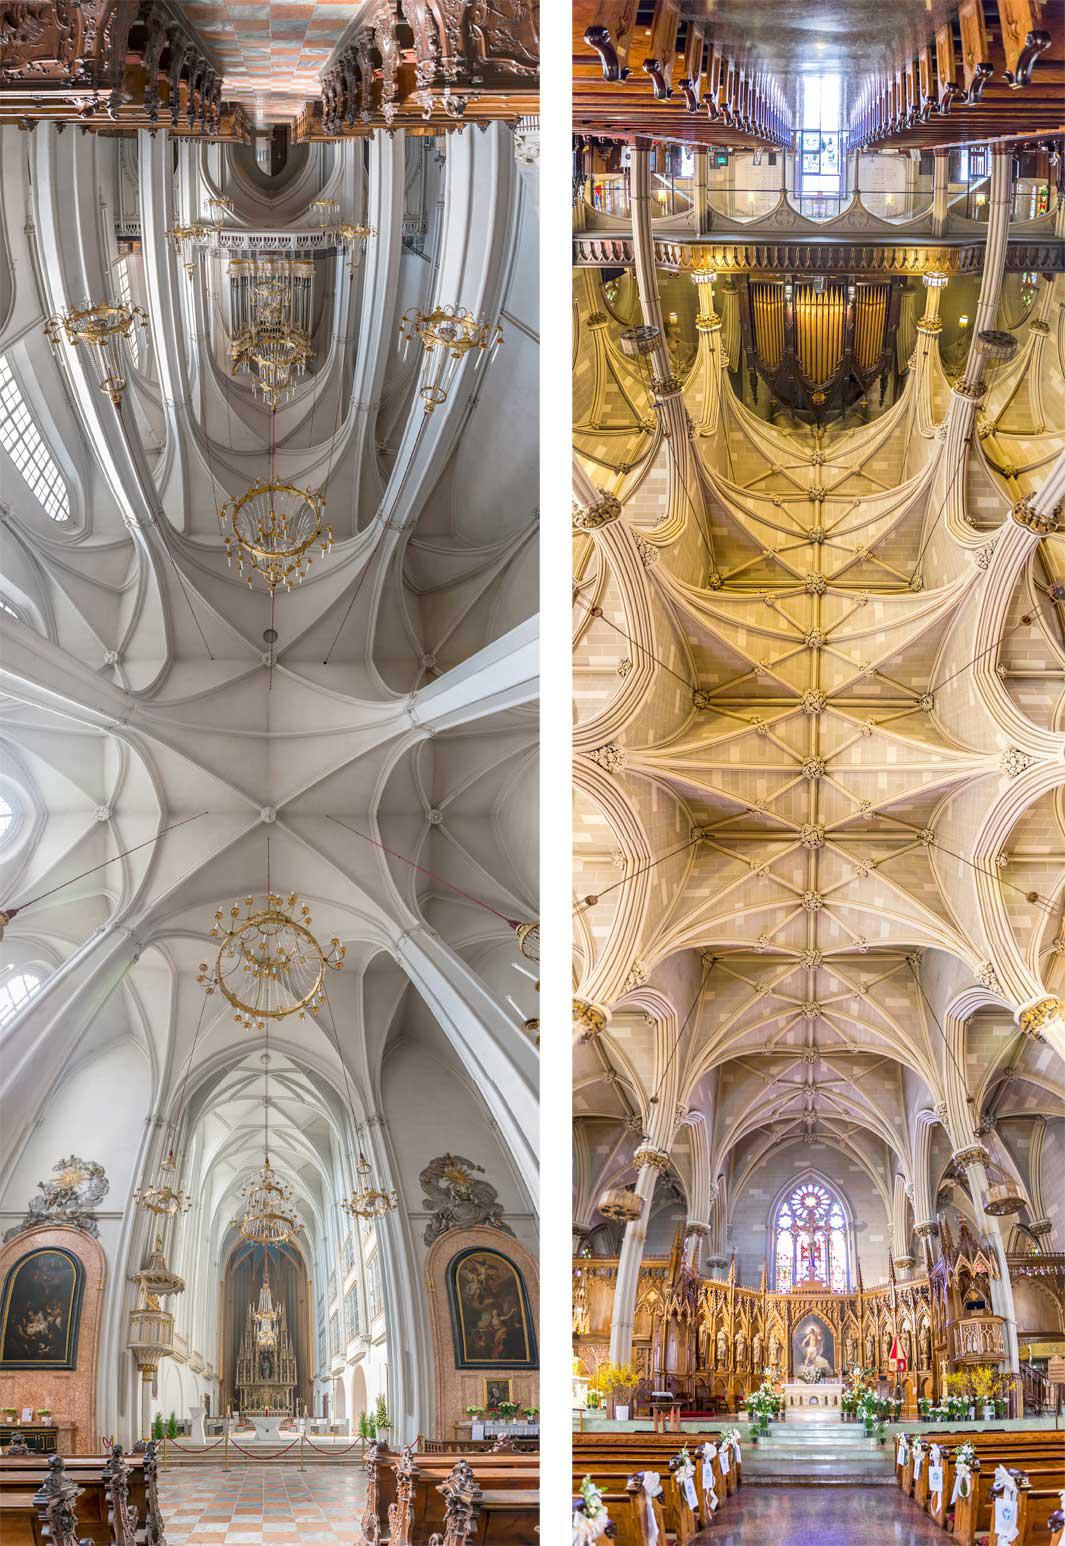 Left: Augustinian Church, Vienna. Right: The Basilica of Saint Patrick's Old Cathedral, New York